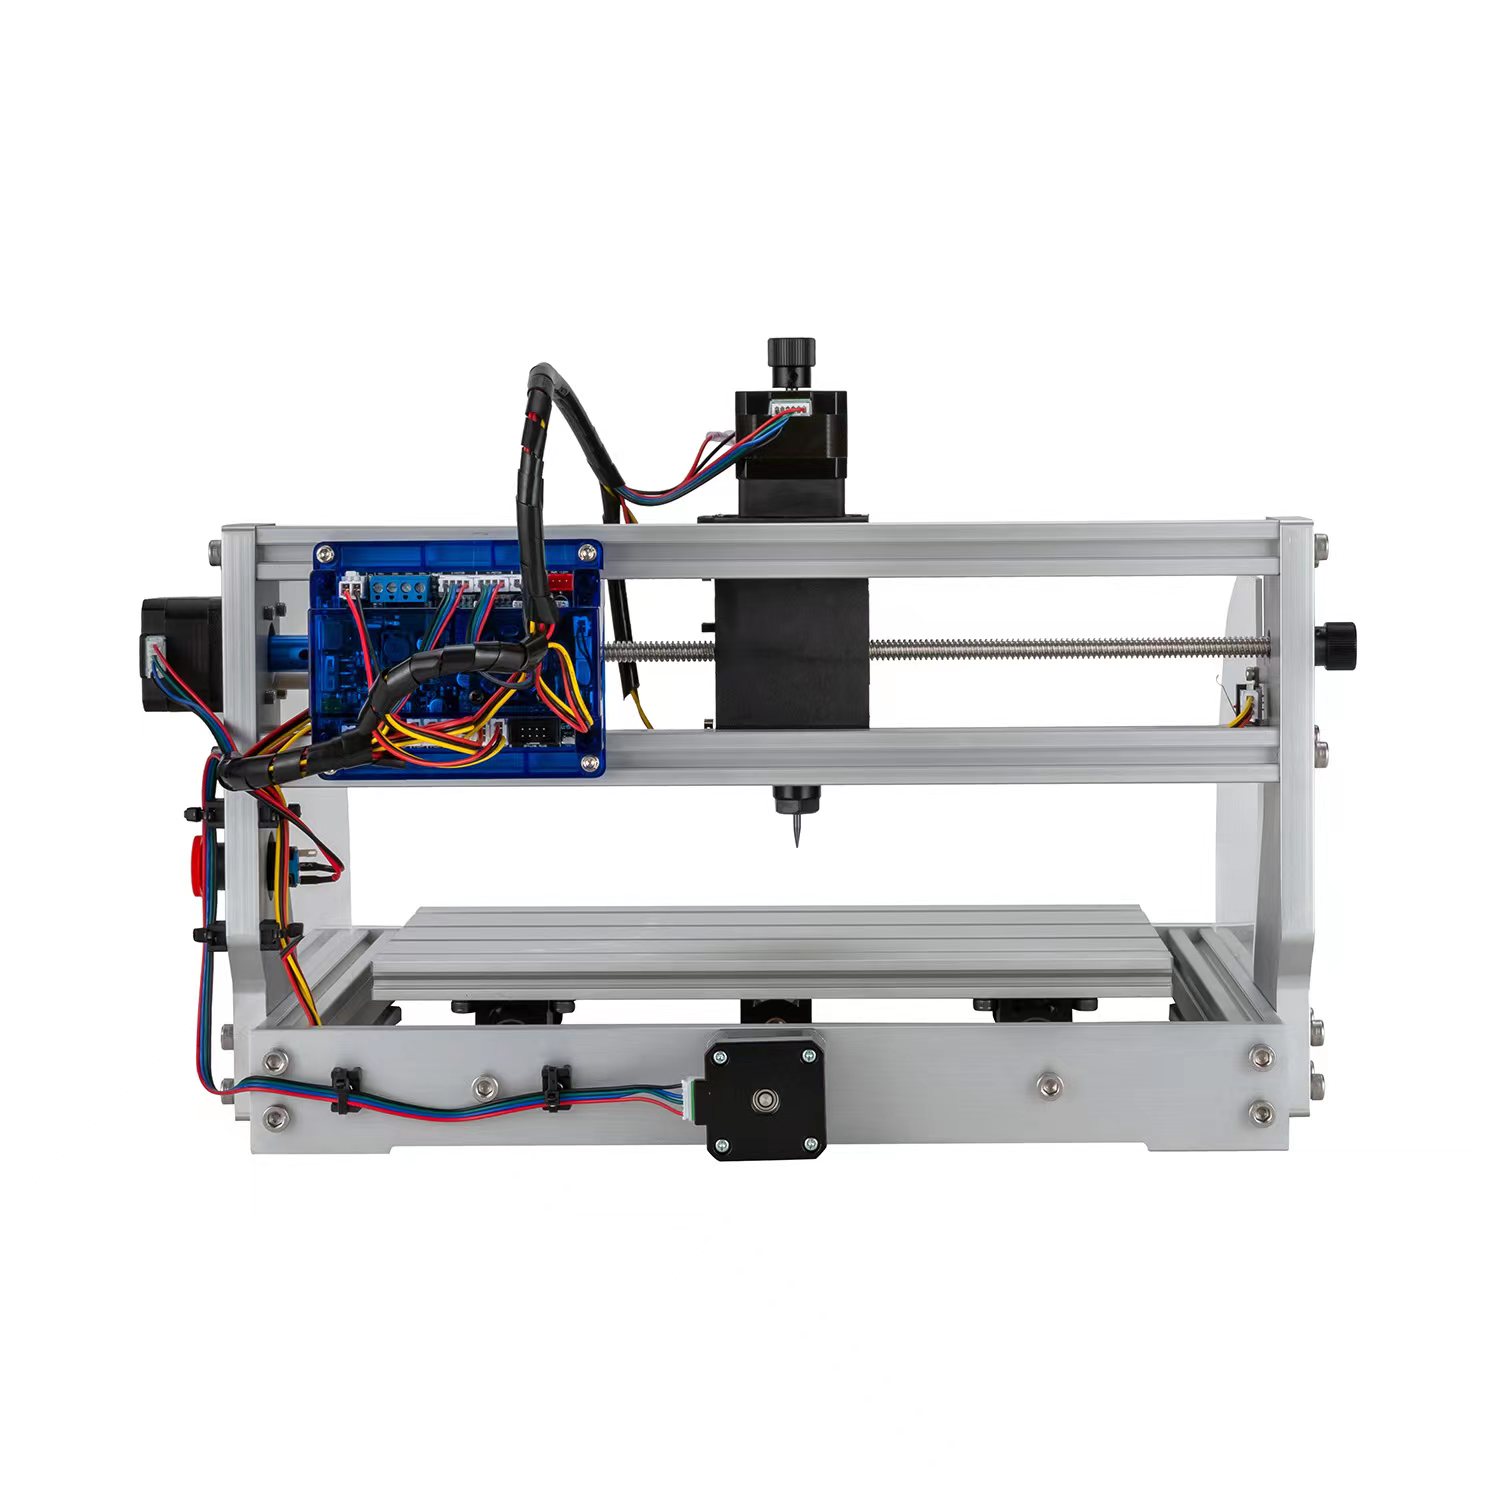 3018-PROVer Desktop CNC Router Machine with 300 x 180 x 45mm, Wood Carving Machine